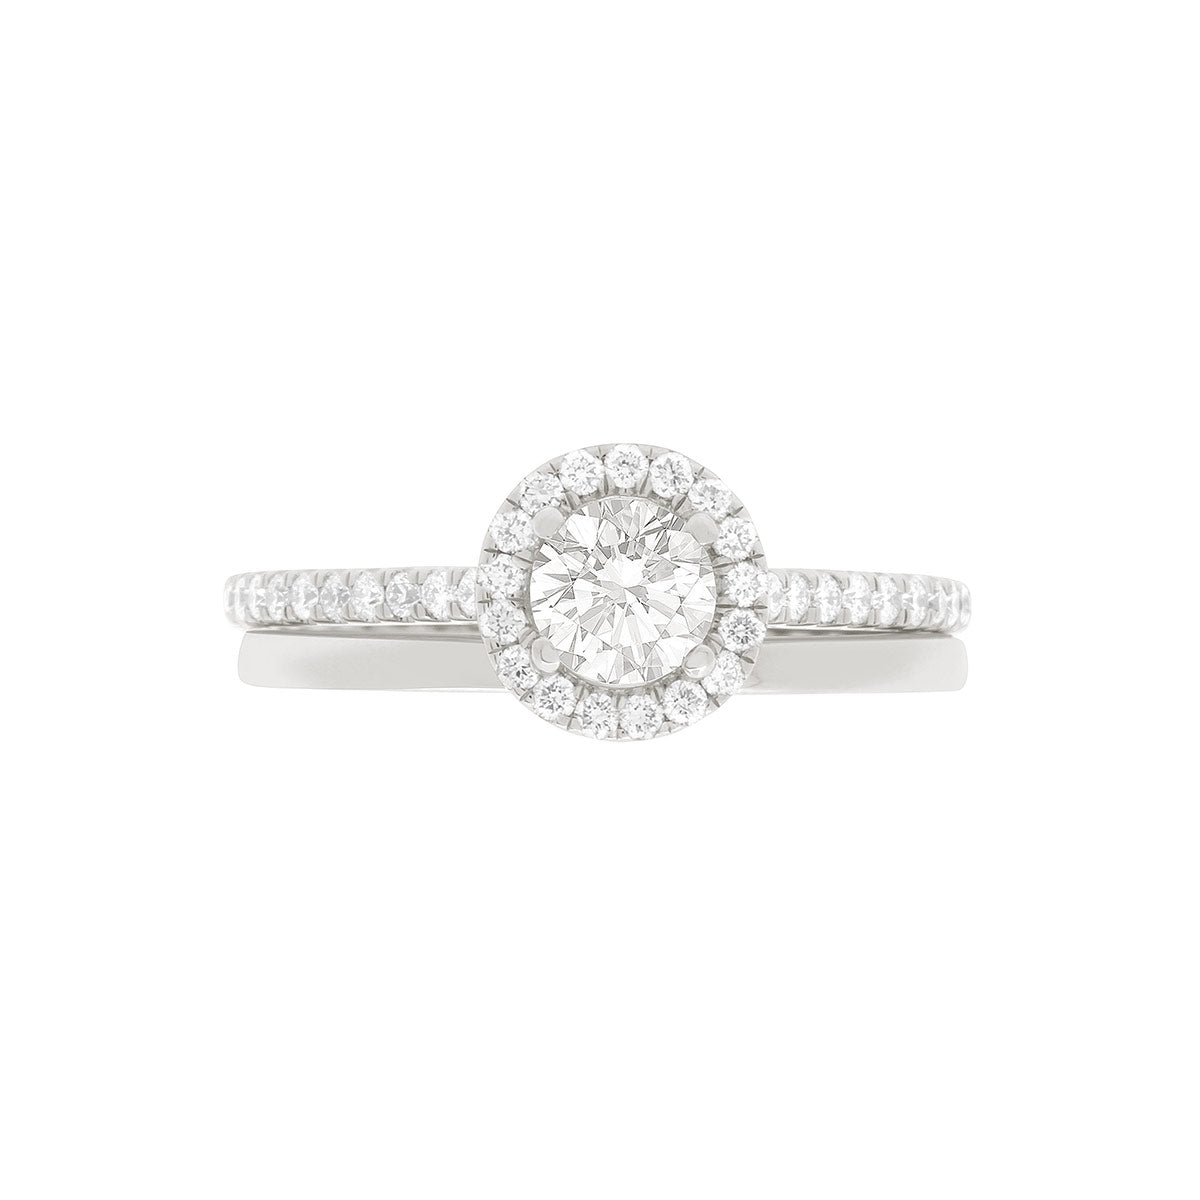 Round Halo Diamond Ring in white gold with a matching plain wedding band